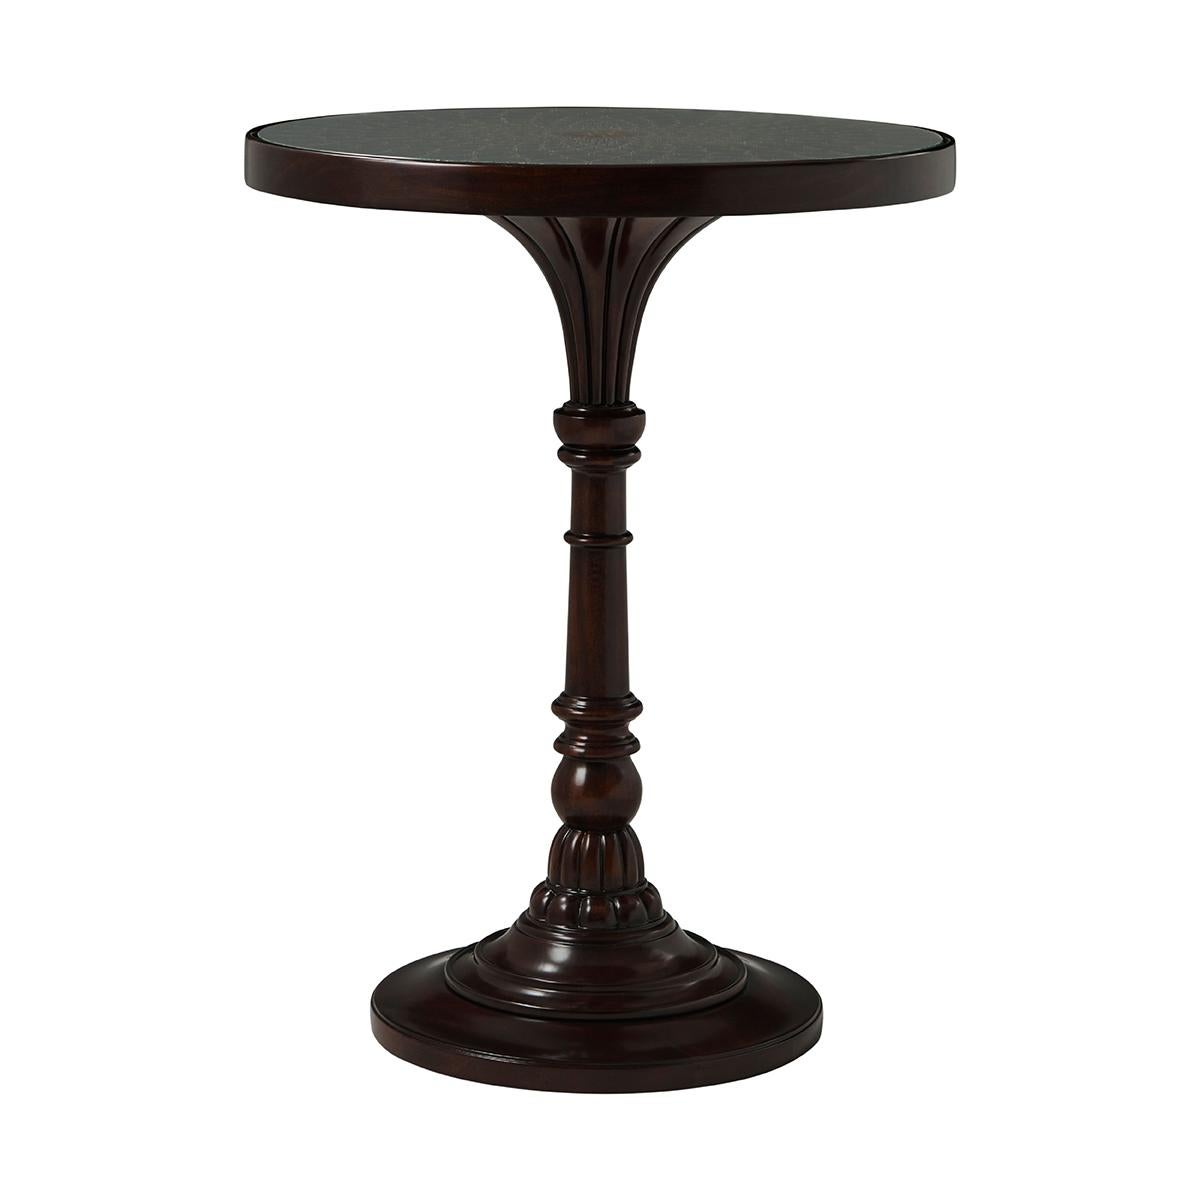 Neoclassical Italian Pedestal Accent Table